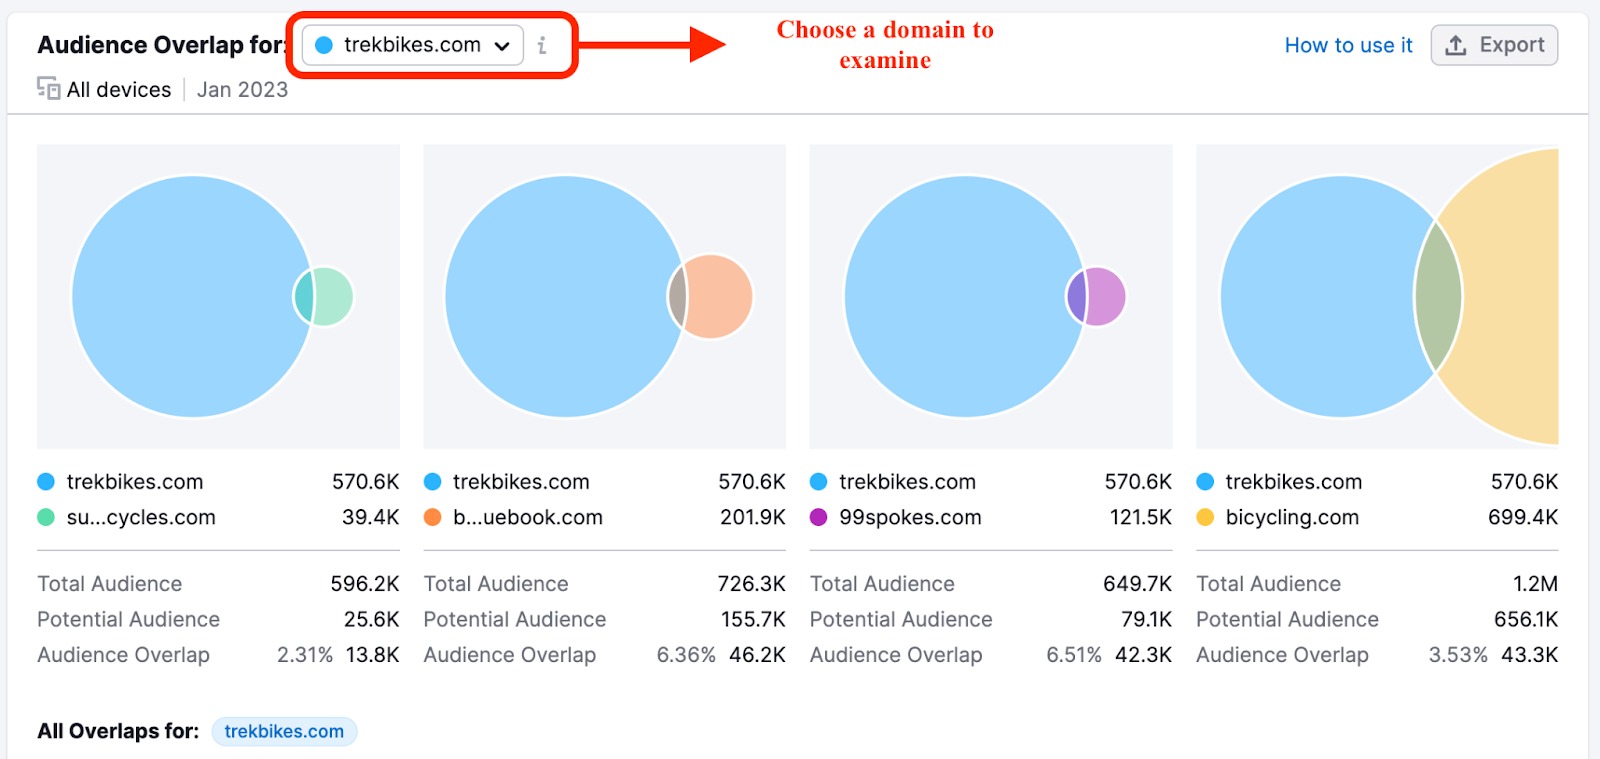 Audience Overlap domain selection allow prioritizing a specific website for this widget